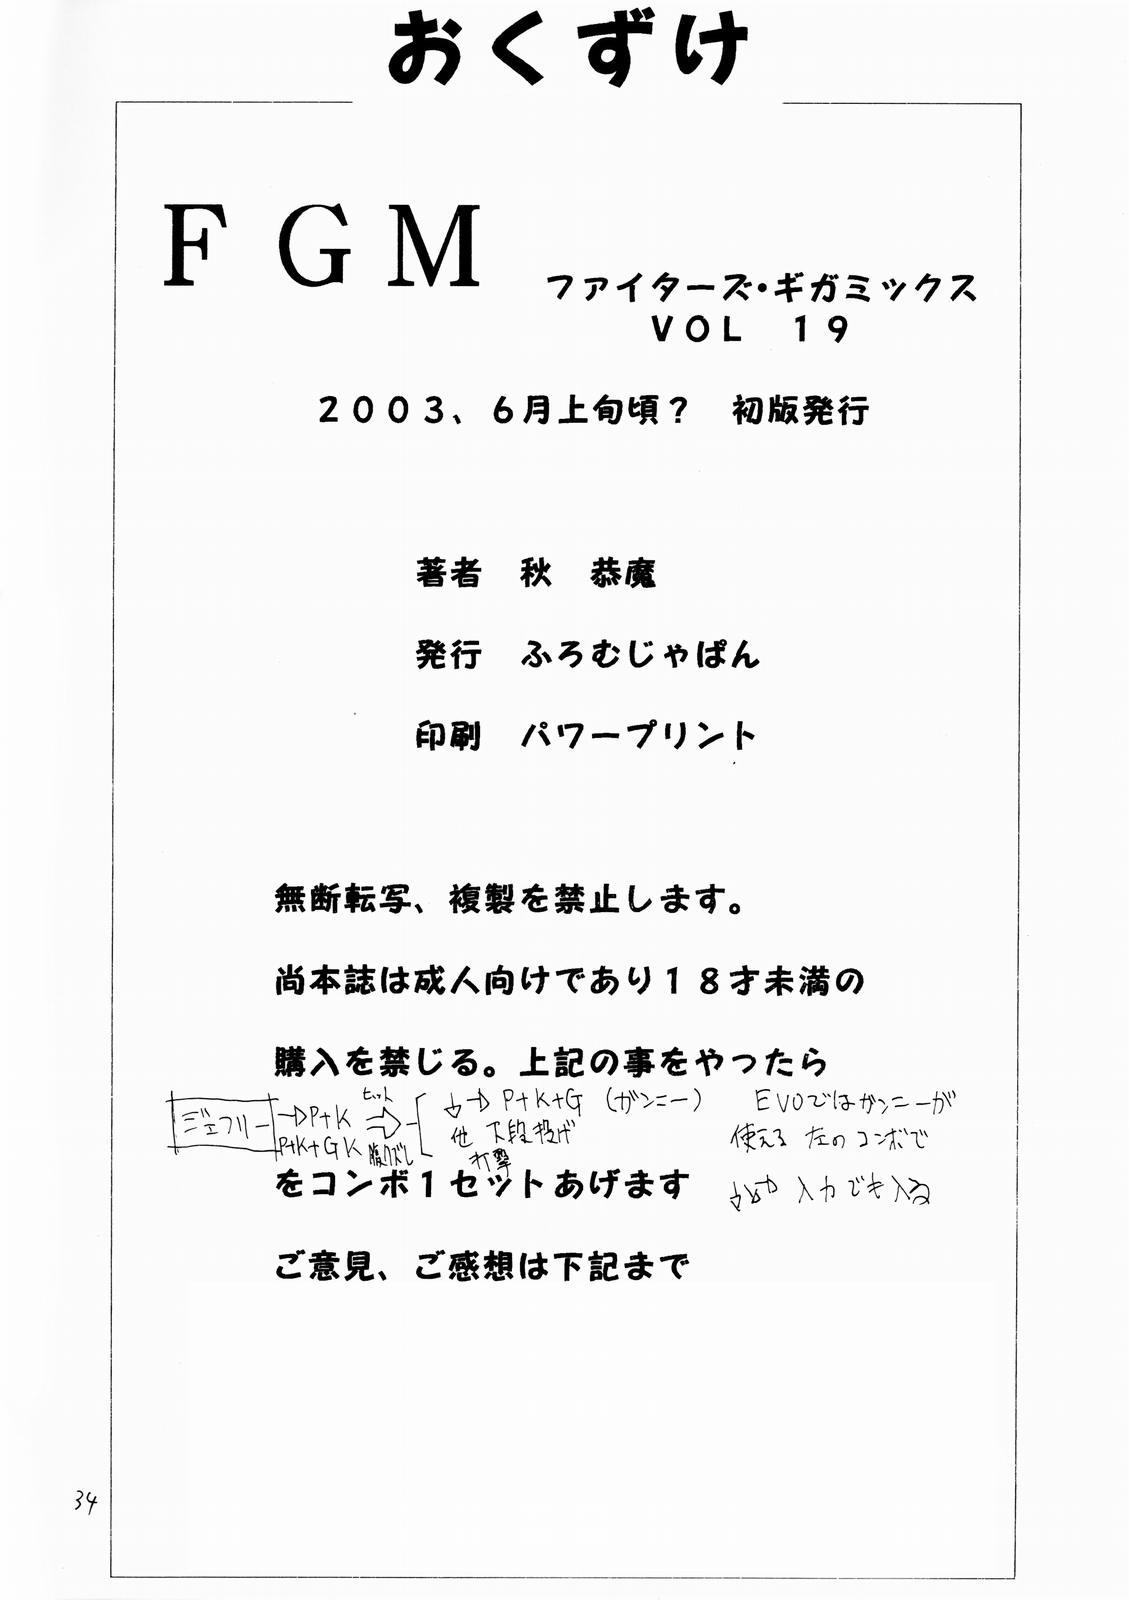 FIGHTERS GiGaMIX FGM vol.19 32